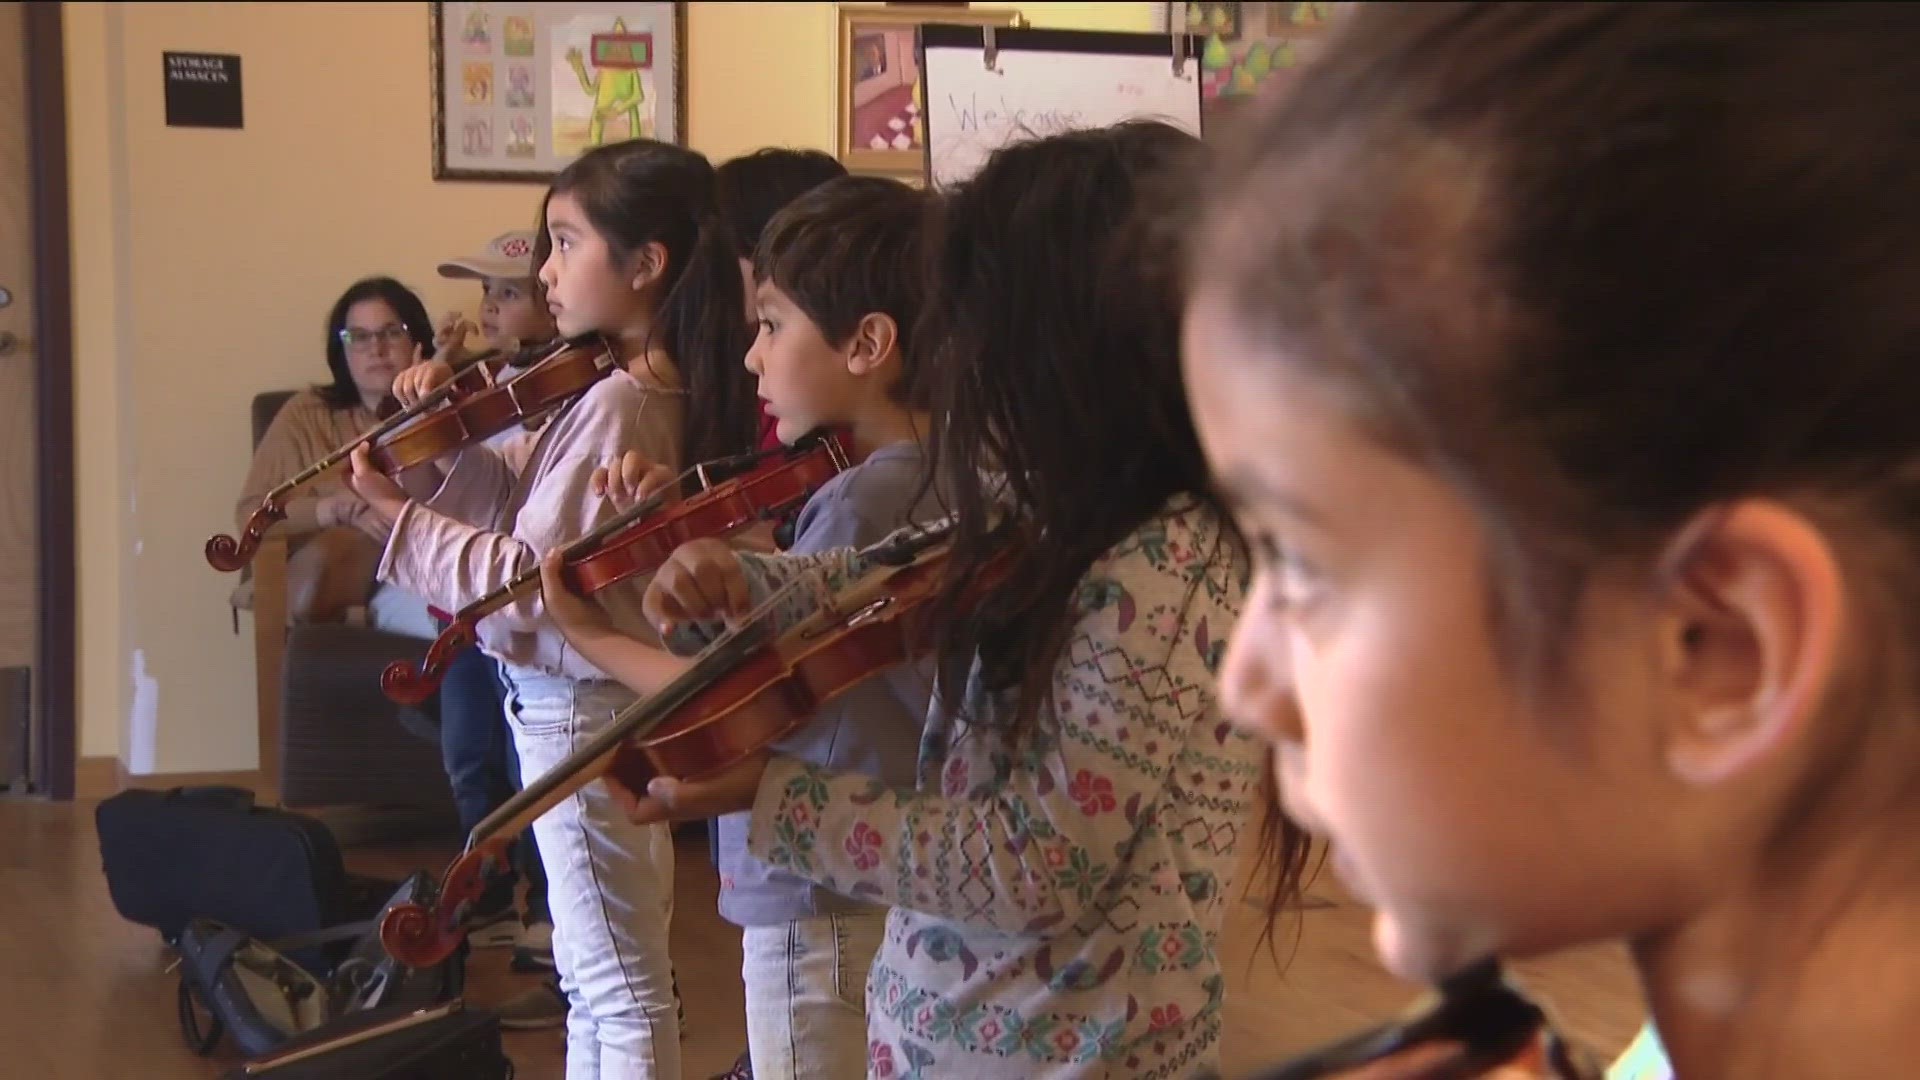 The non-profit organization gives classical music lessons at no charge to hundreds of underserved students in San Diego.